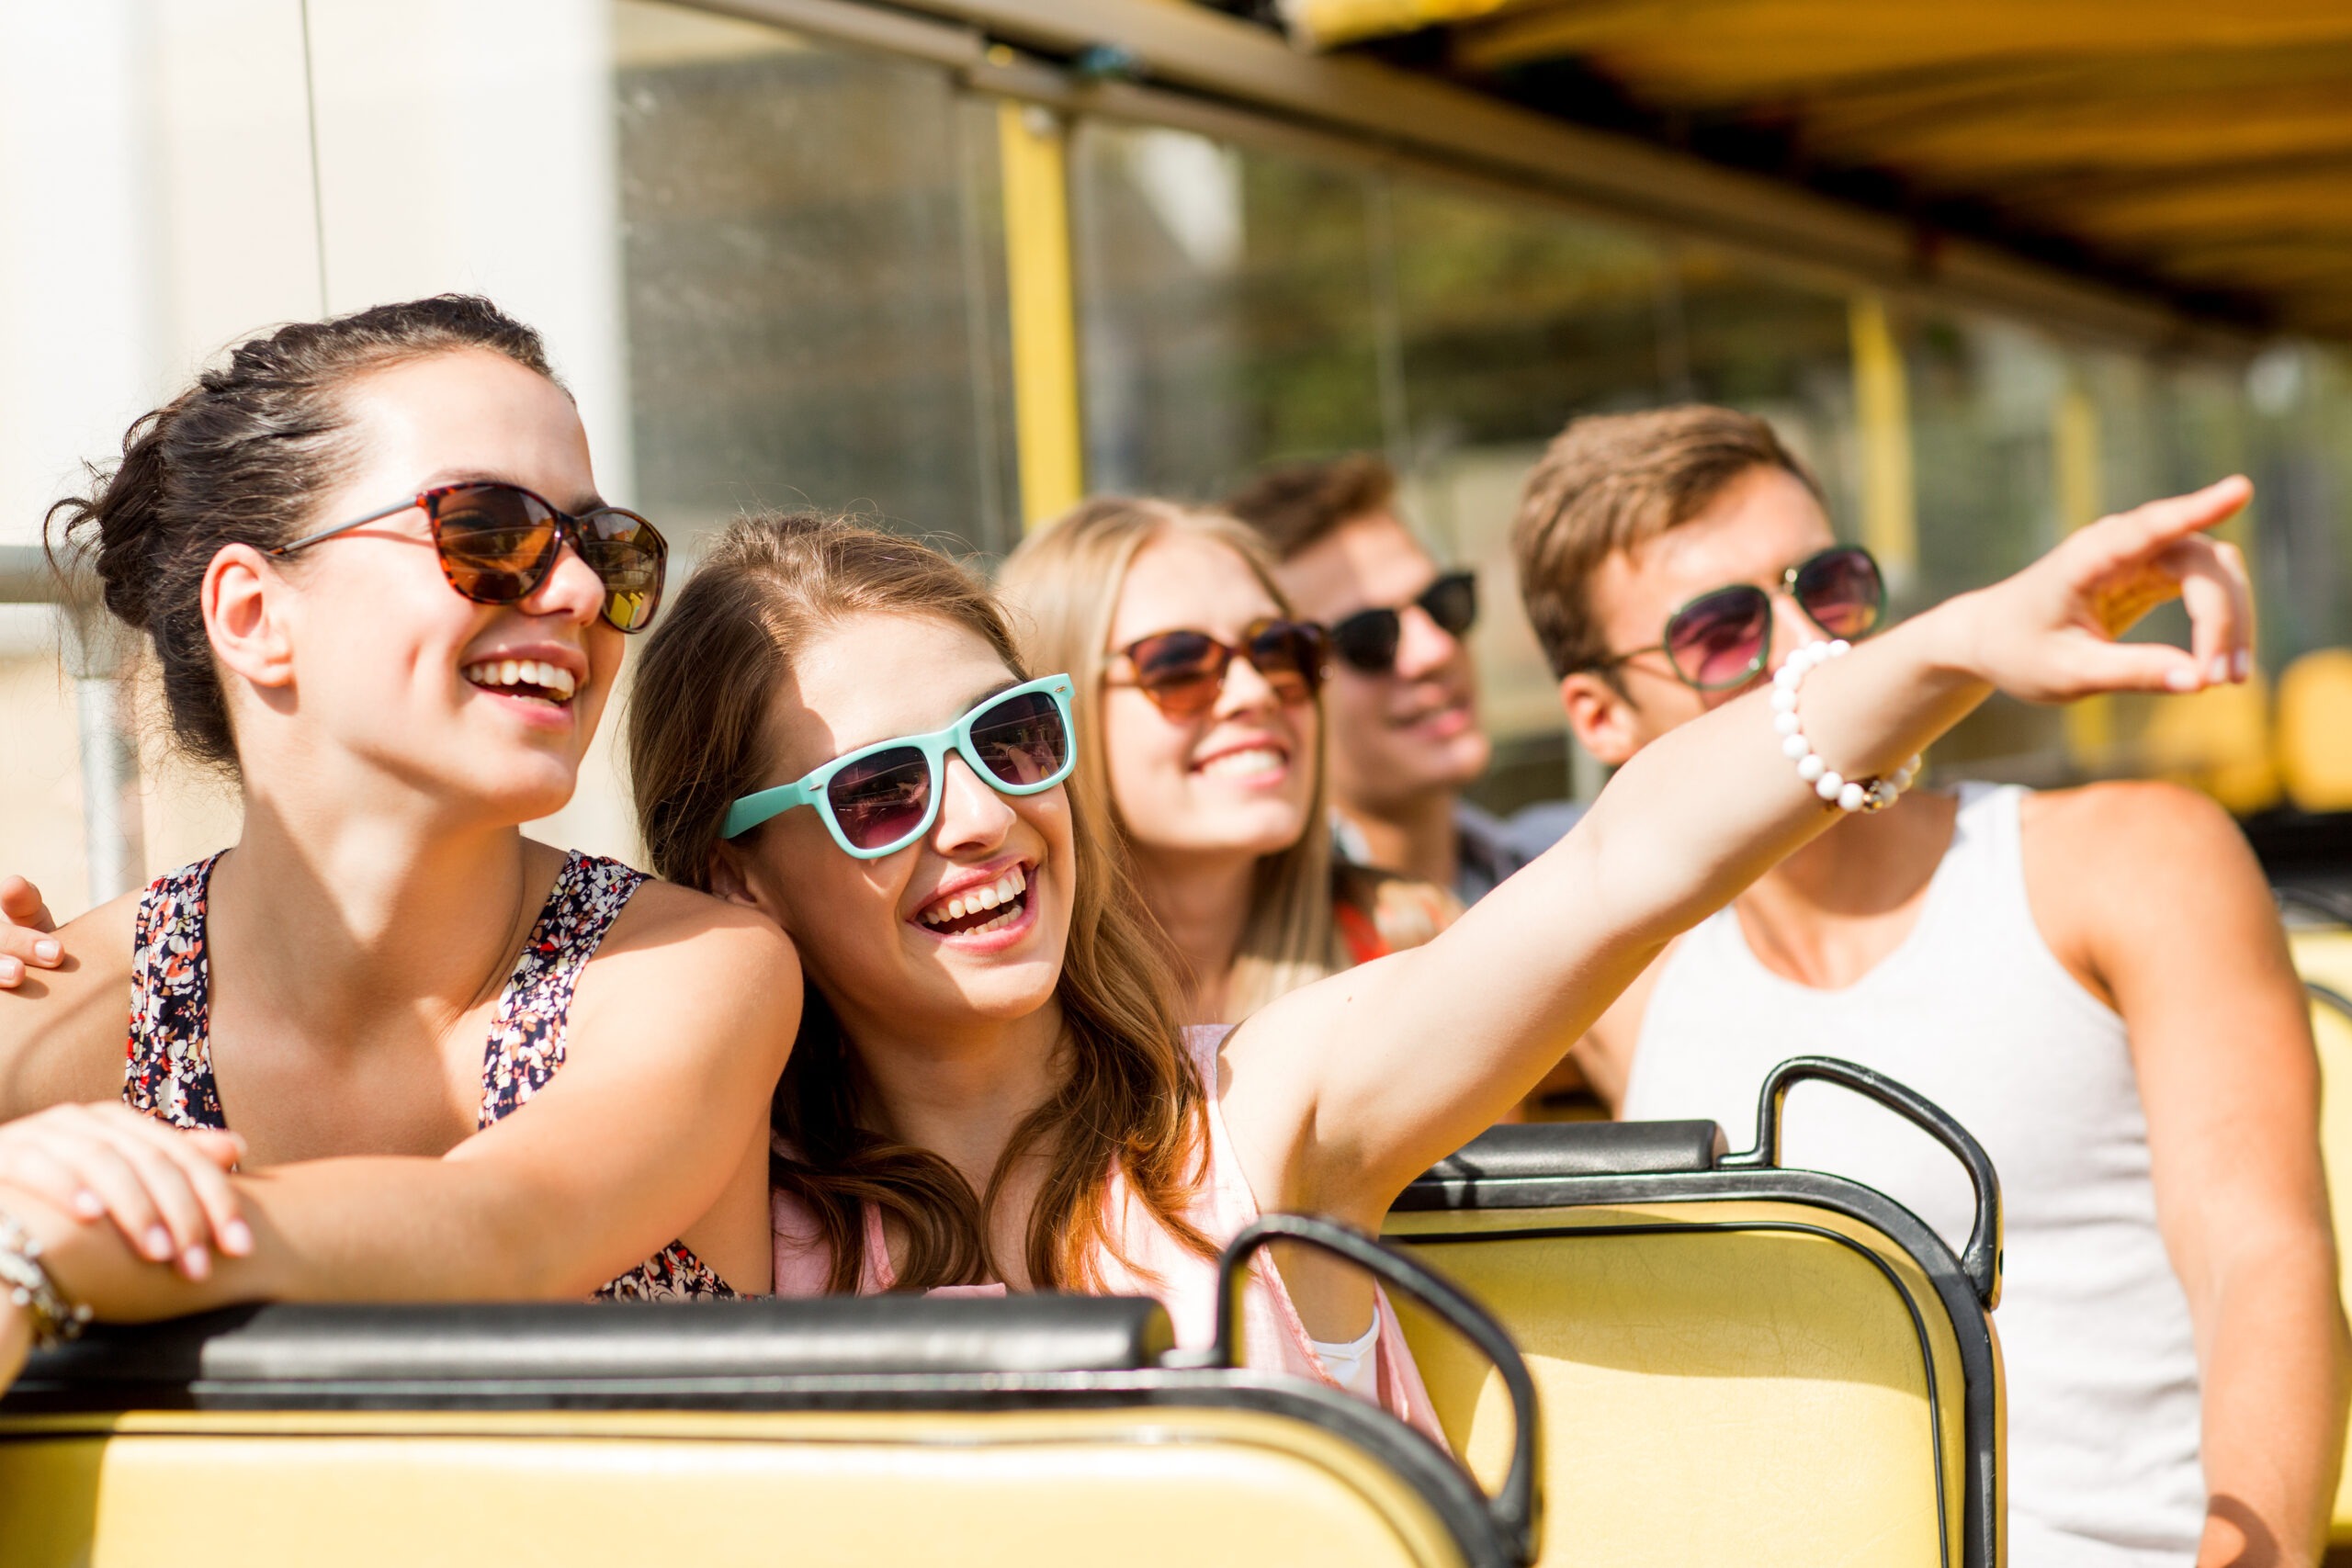 group of smiling friends traveling by tour bus